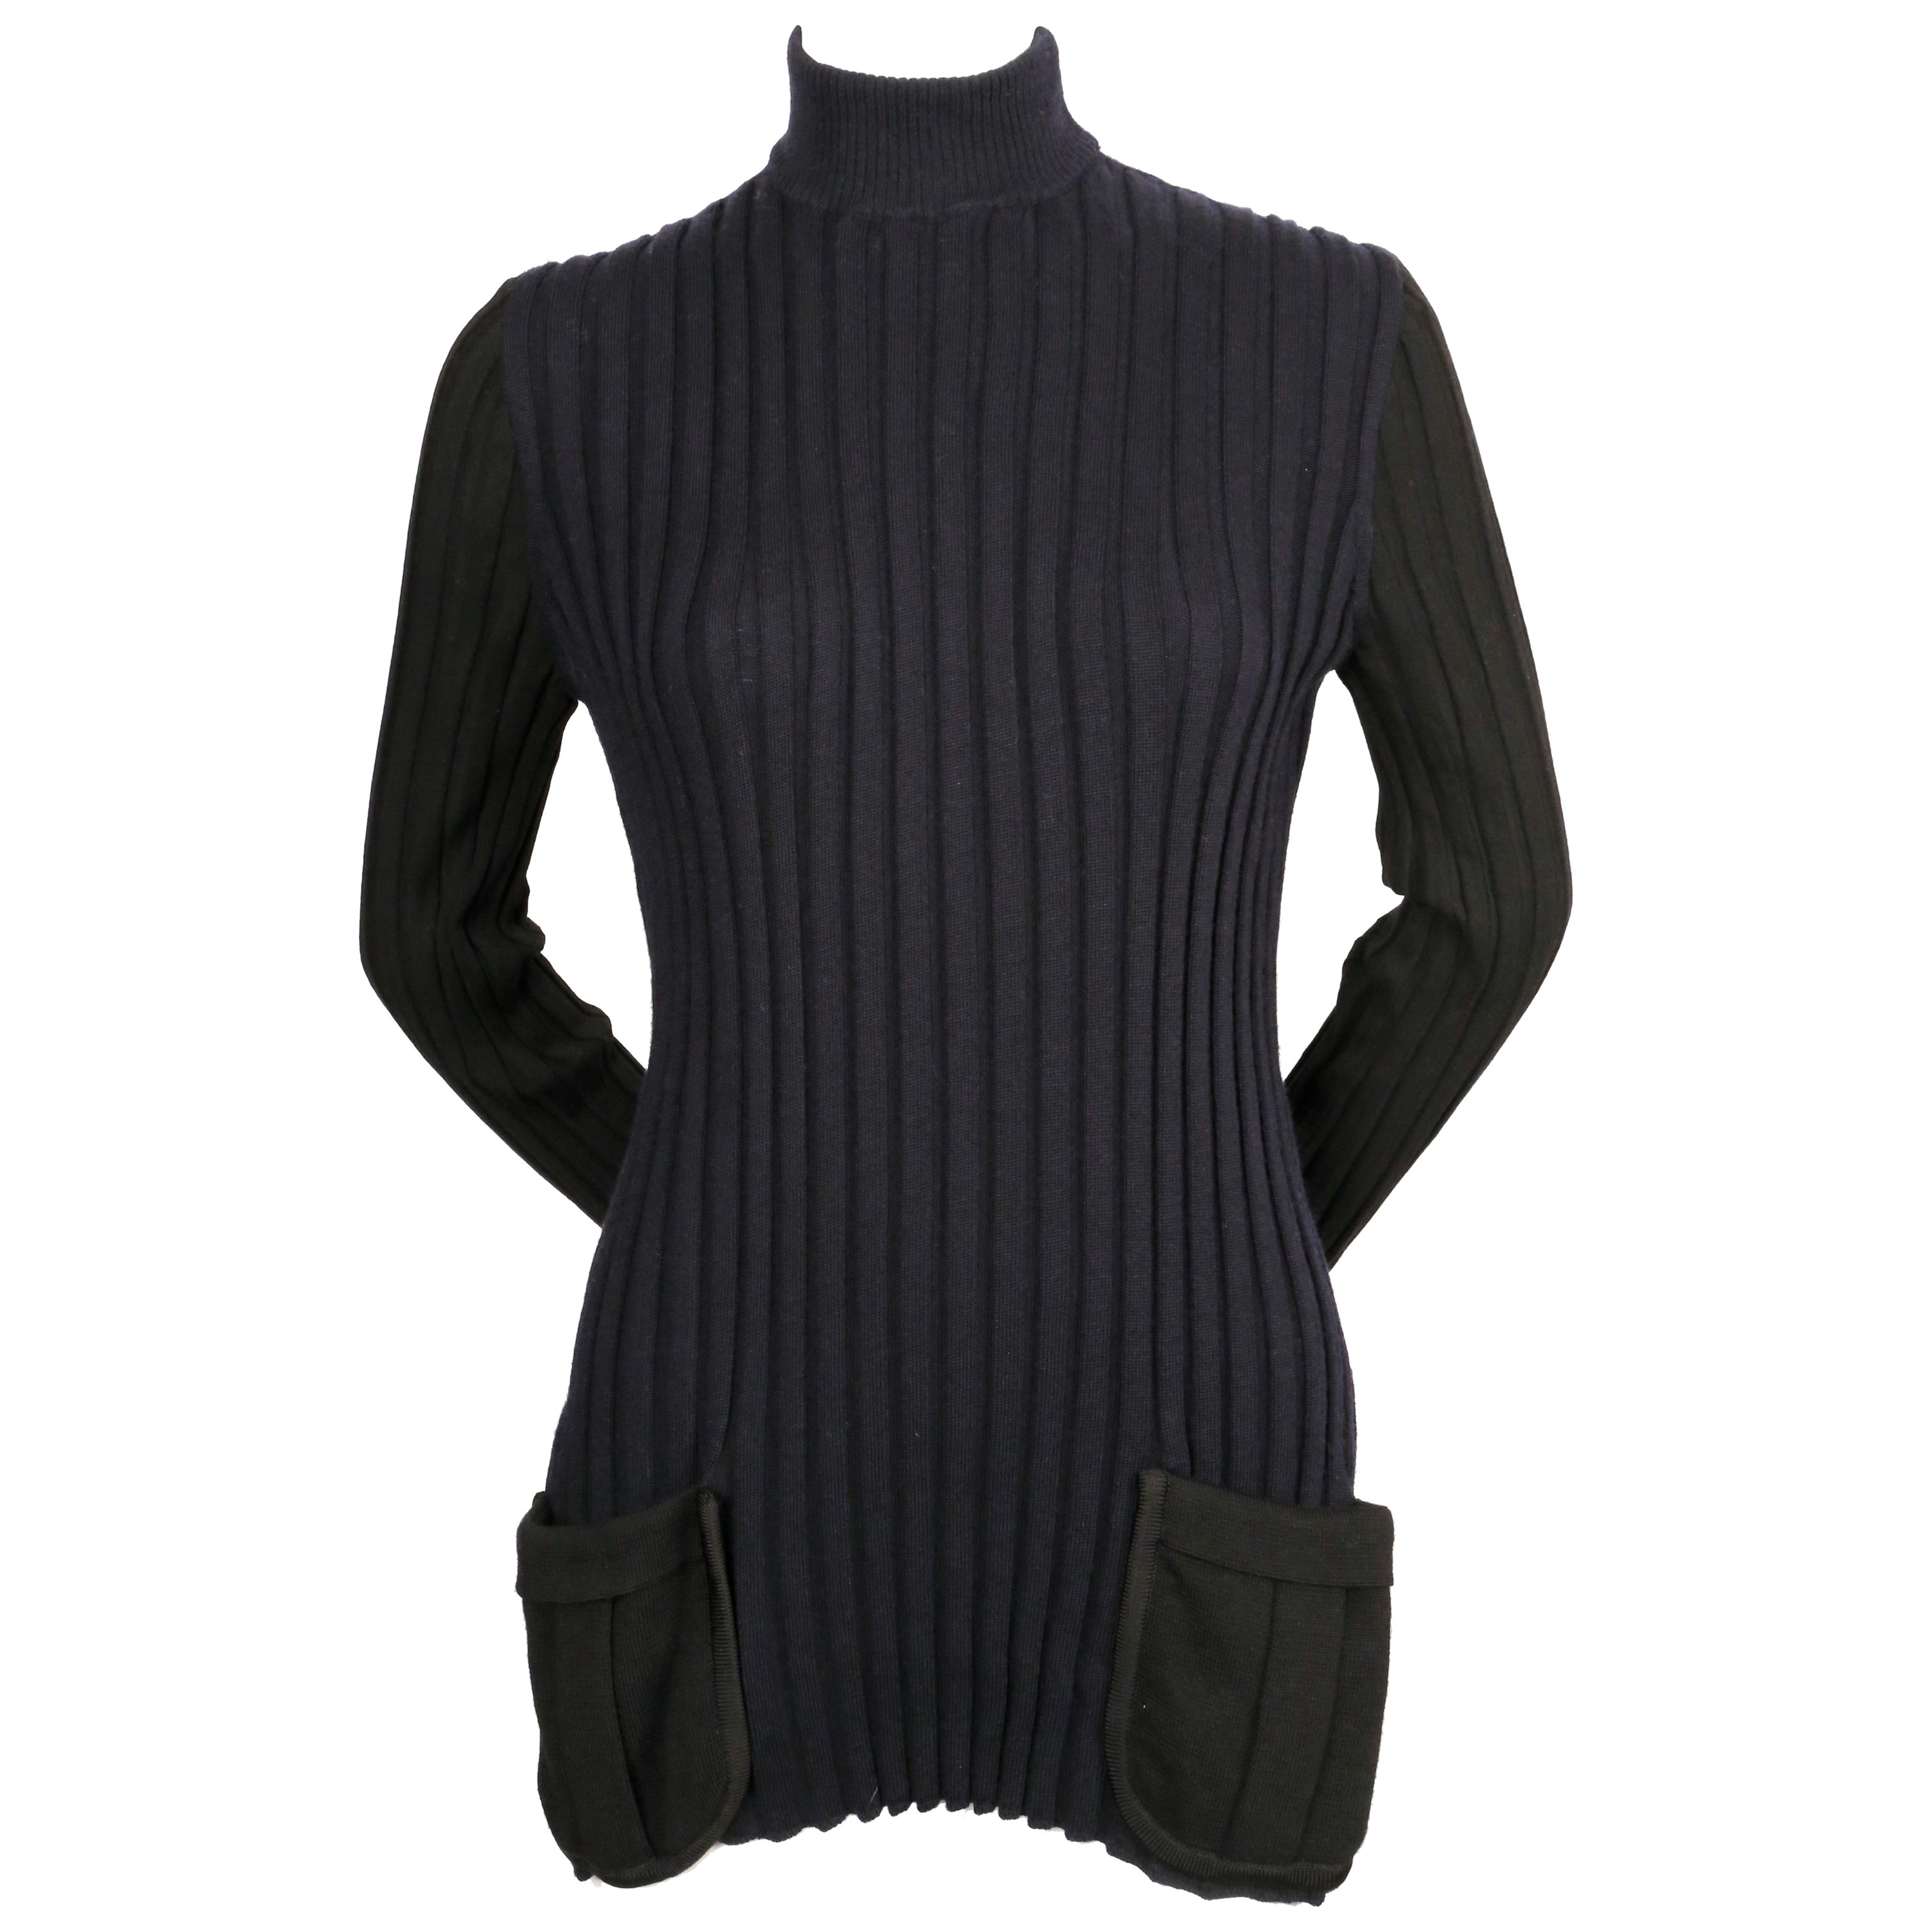 2015 CELINE by PHOEBE PHILO navy & black ribbed sweater tunic with patch pockets For Sale